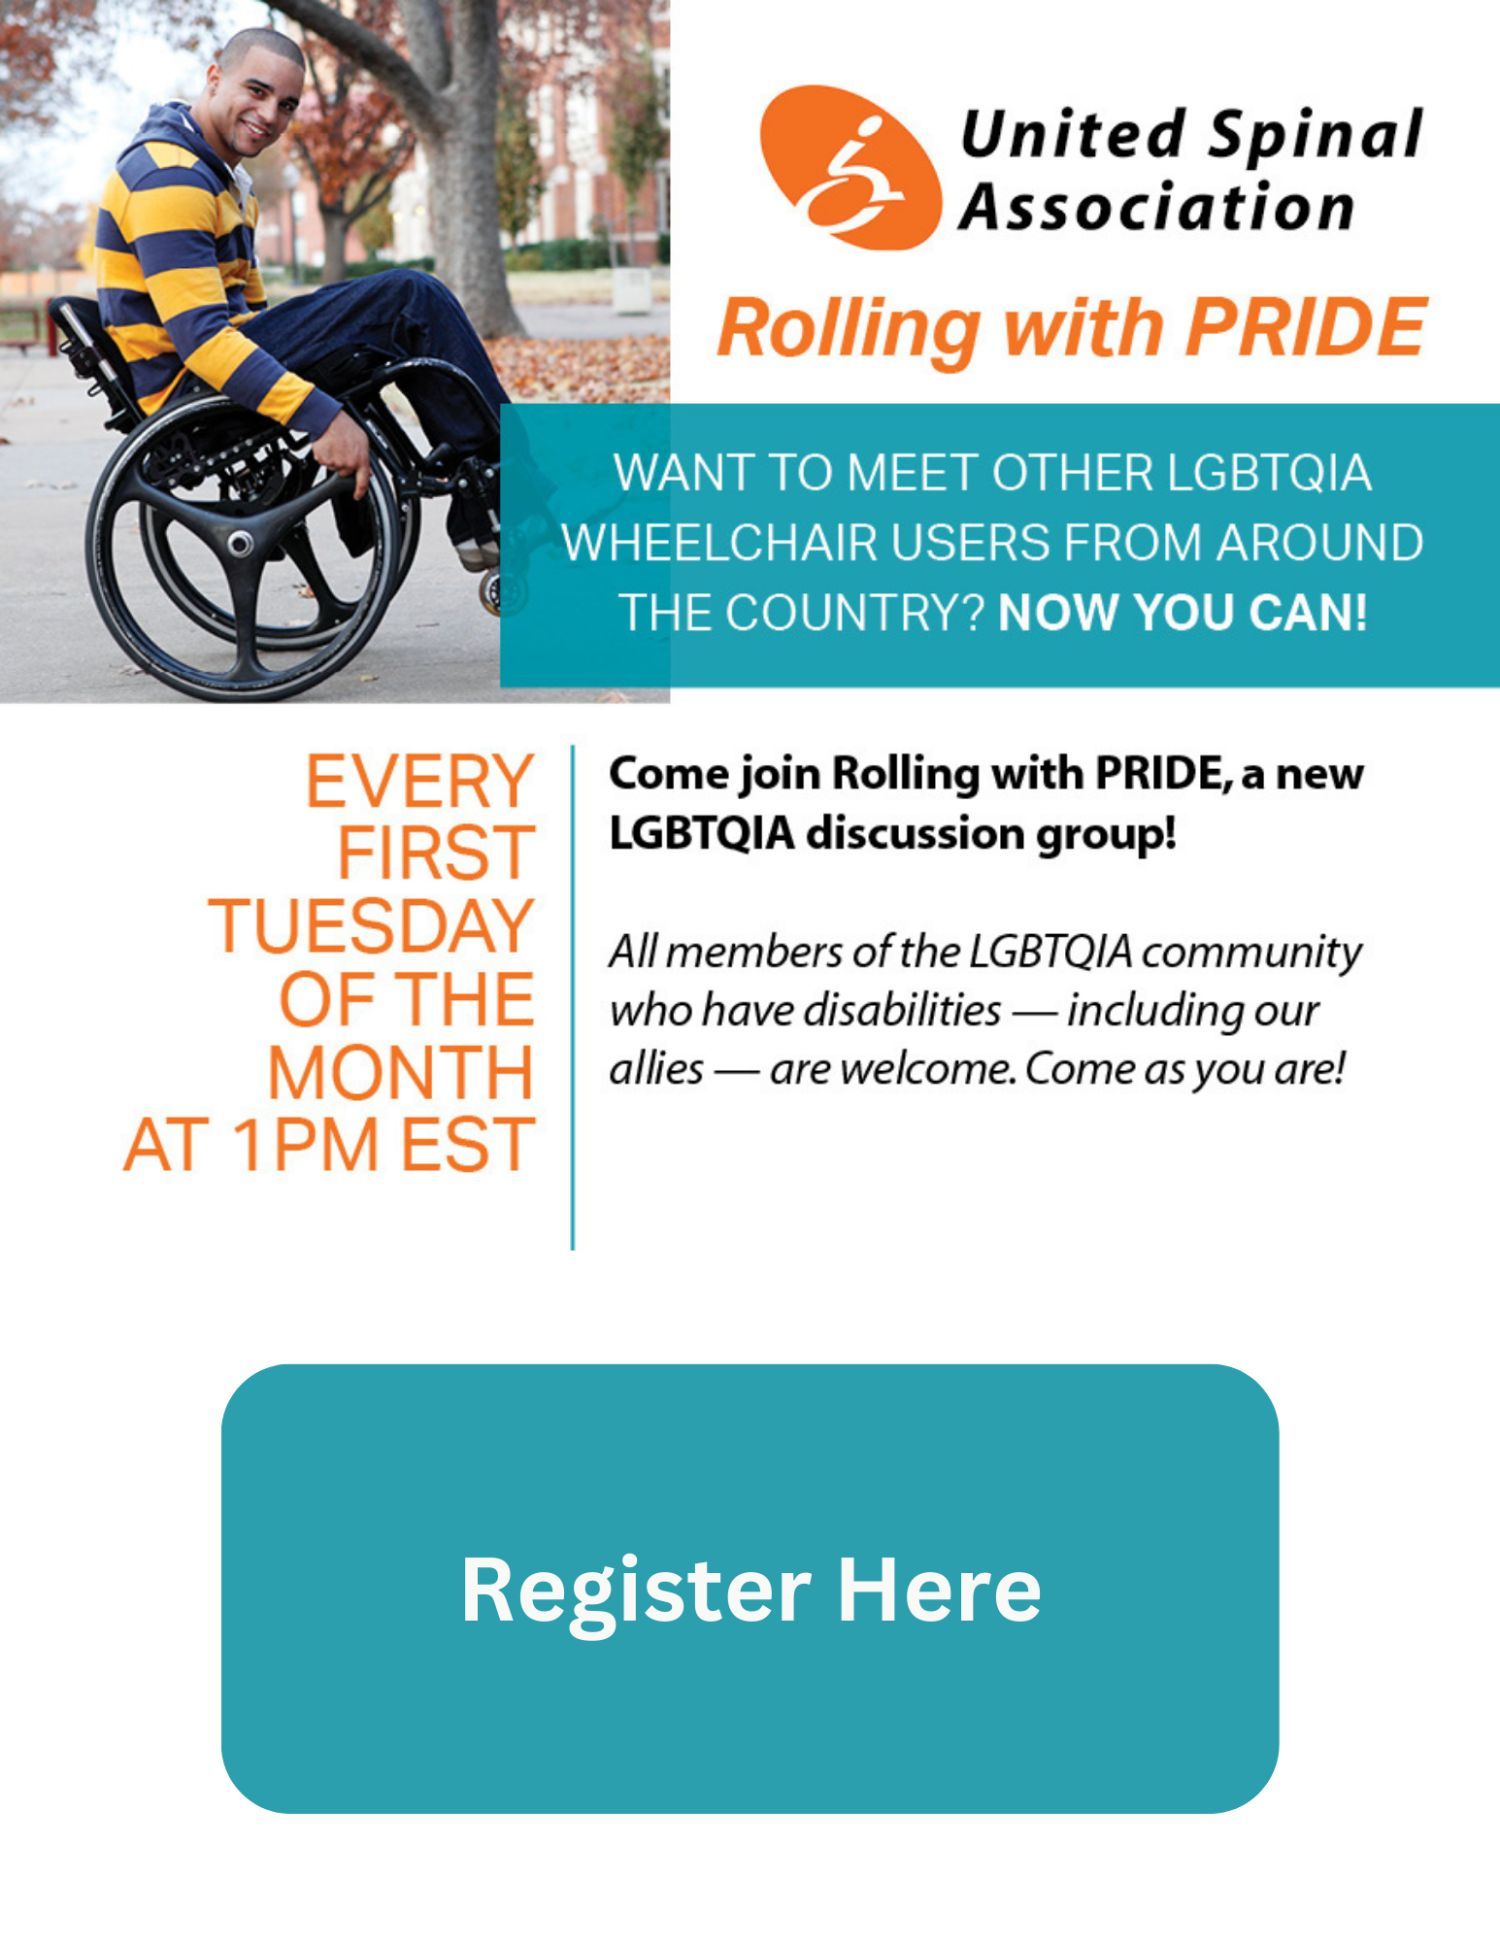 Image description: United spinal association Rolling with pride. There's an image of an individual doing a wheelie in a manual wheelchair. Text: United spinal association, Rolling with pride. Want to meet other LGB TQIA wheelchair users from around the country ?now you can! Come join rolling with pride, a new LGBTQIA discussion group! All members of the LGBTQIA Community who have disabilities -including our allies-are welcome. Come as you are! Every first Tuesday of the month at 1 PM EST. There is a blue register here button at the bottom of the image. Click the image to register.